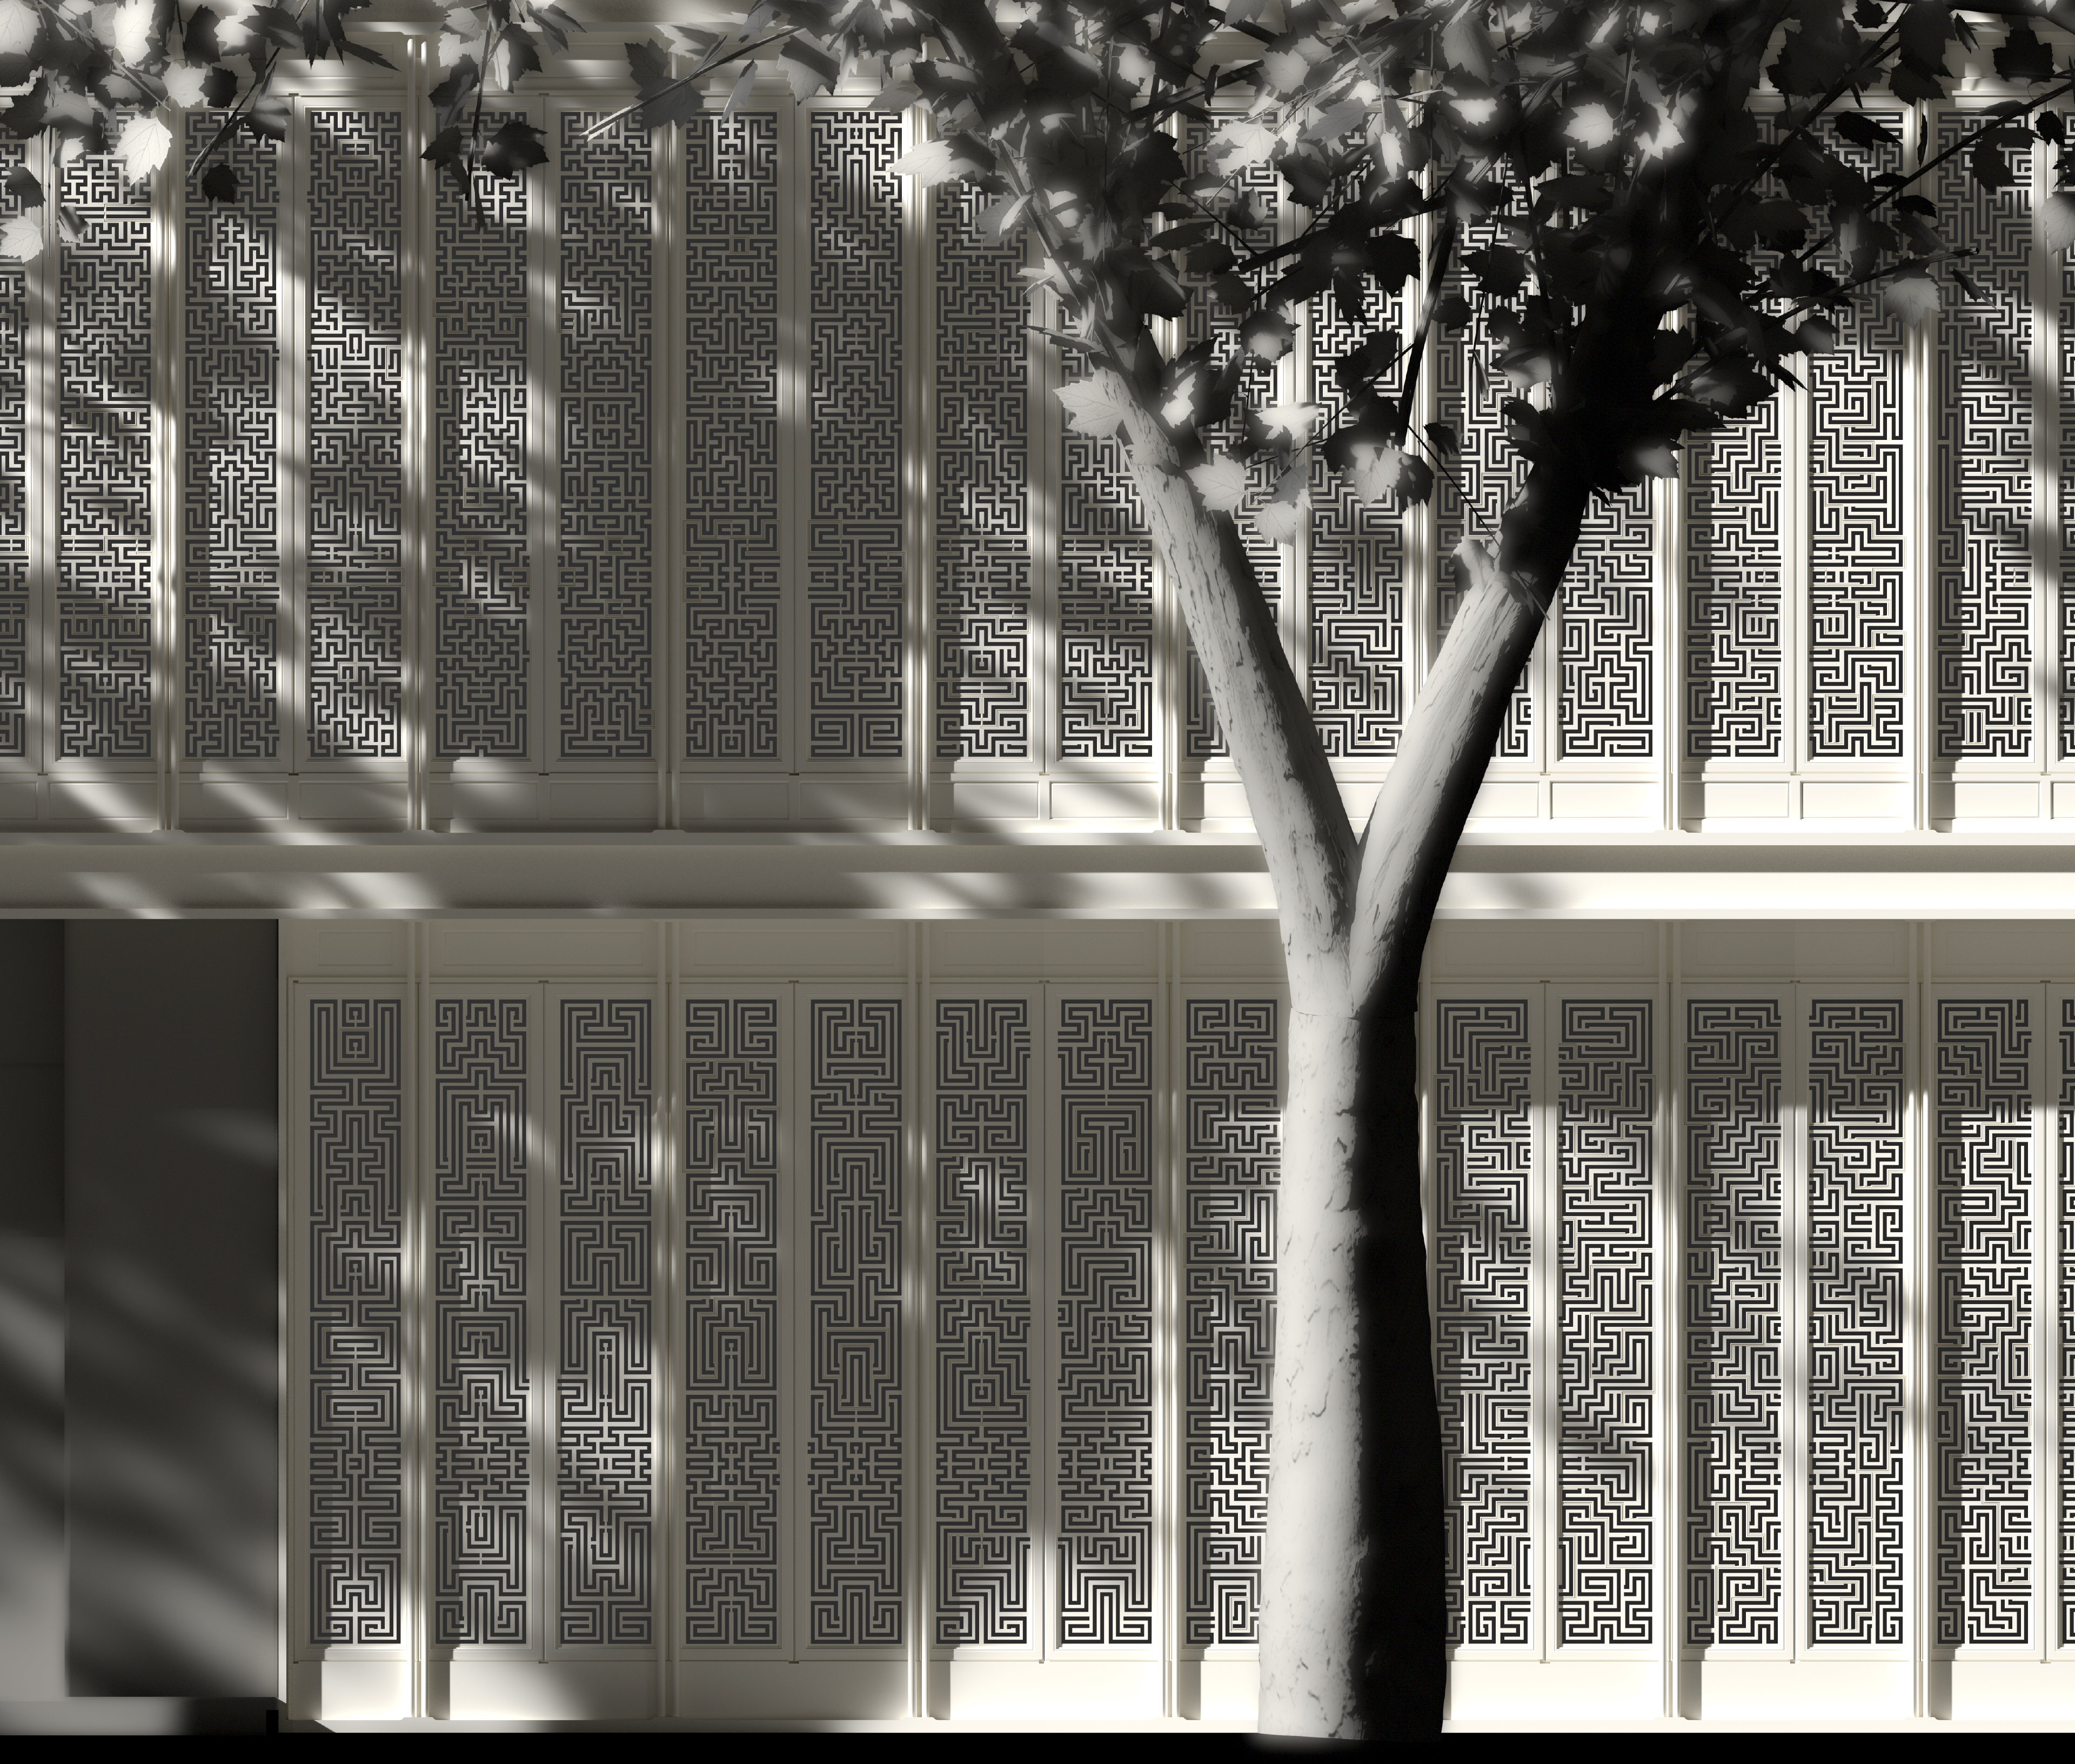 Detail of Ground and First Floor Panels from the Computer Rendered Street Elevation of Version-109,027,350,432,000, Plasticité+, An Implementation of Artificial Intelligence for the Design, Visualization and Digital Fabrication of a Referential Façade of Historical Chinese Art and Architecture, J.Travis Bennett Russett